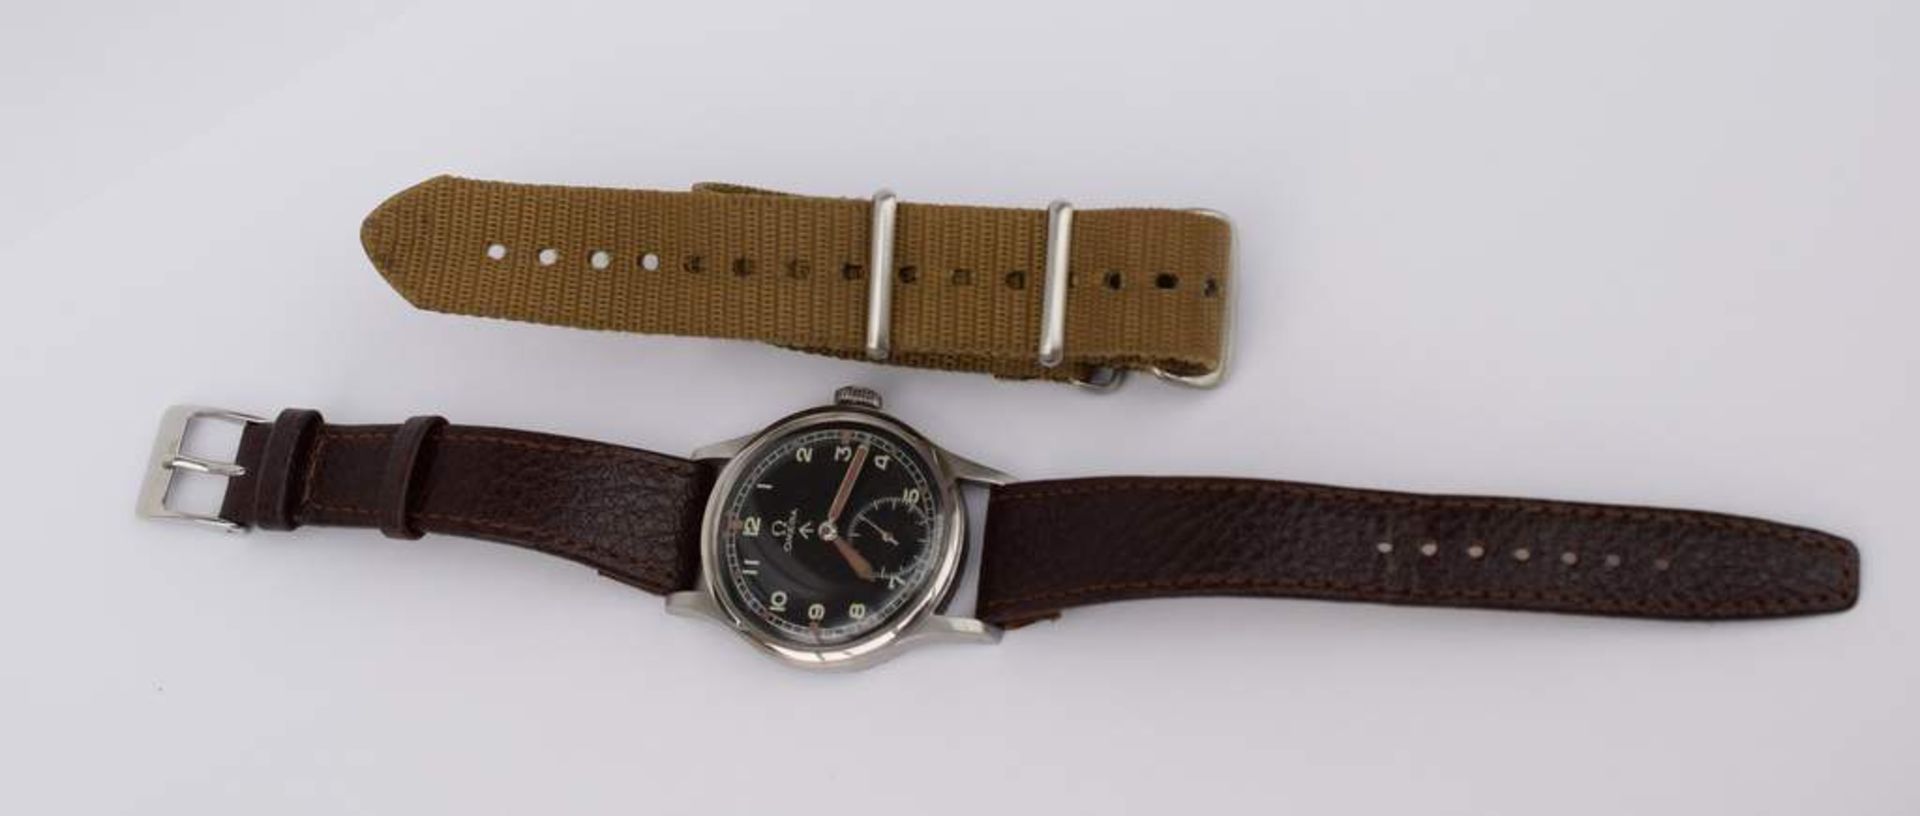 Omega WW2 Military Watch 'The Dirty Dozen' *Reserve reduced - 18.8.16* - Image 8 of 12